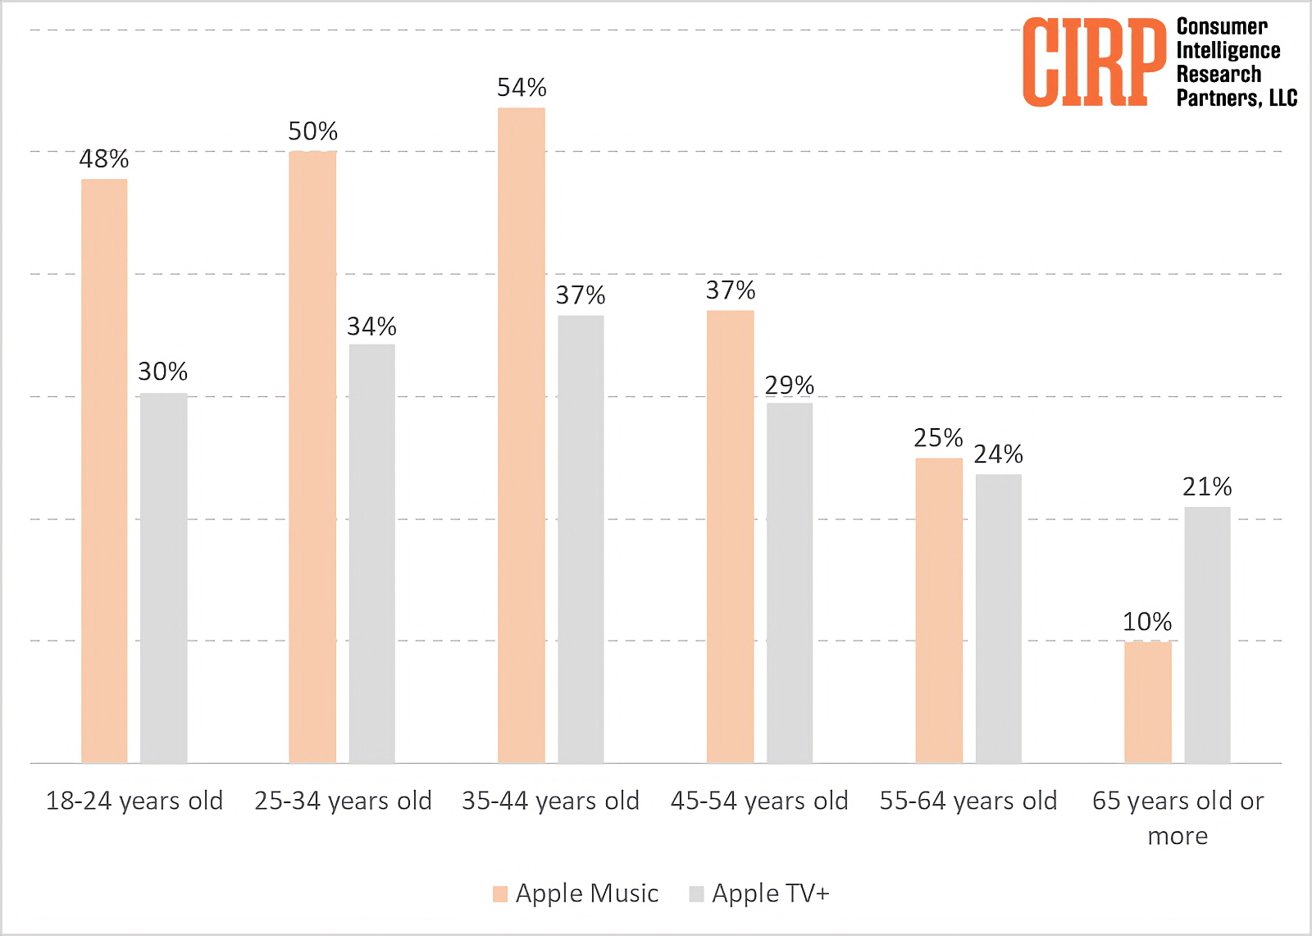 Apple Music and Apple TV+ use by age